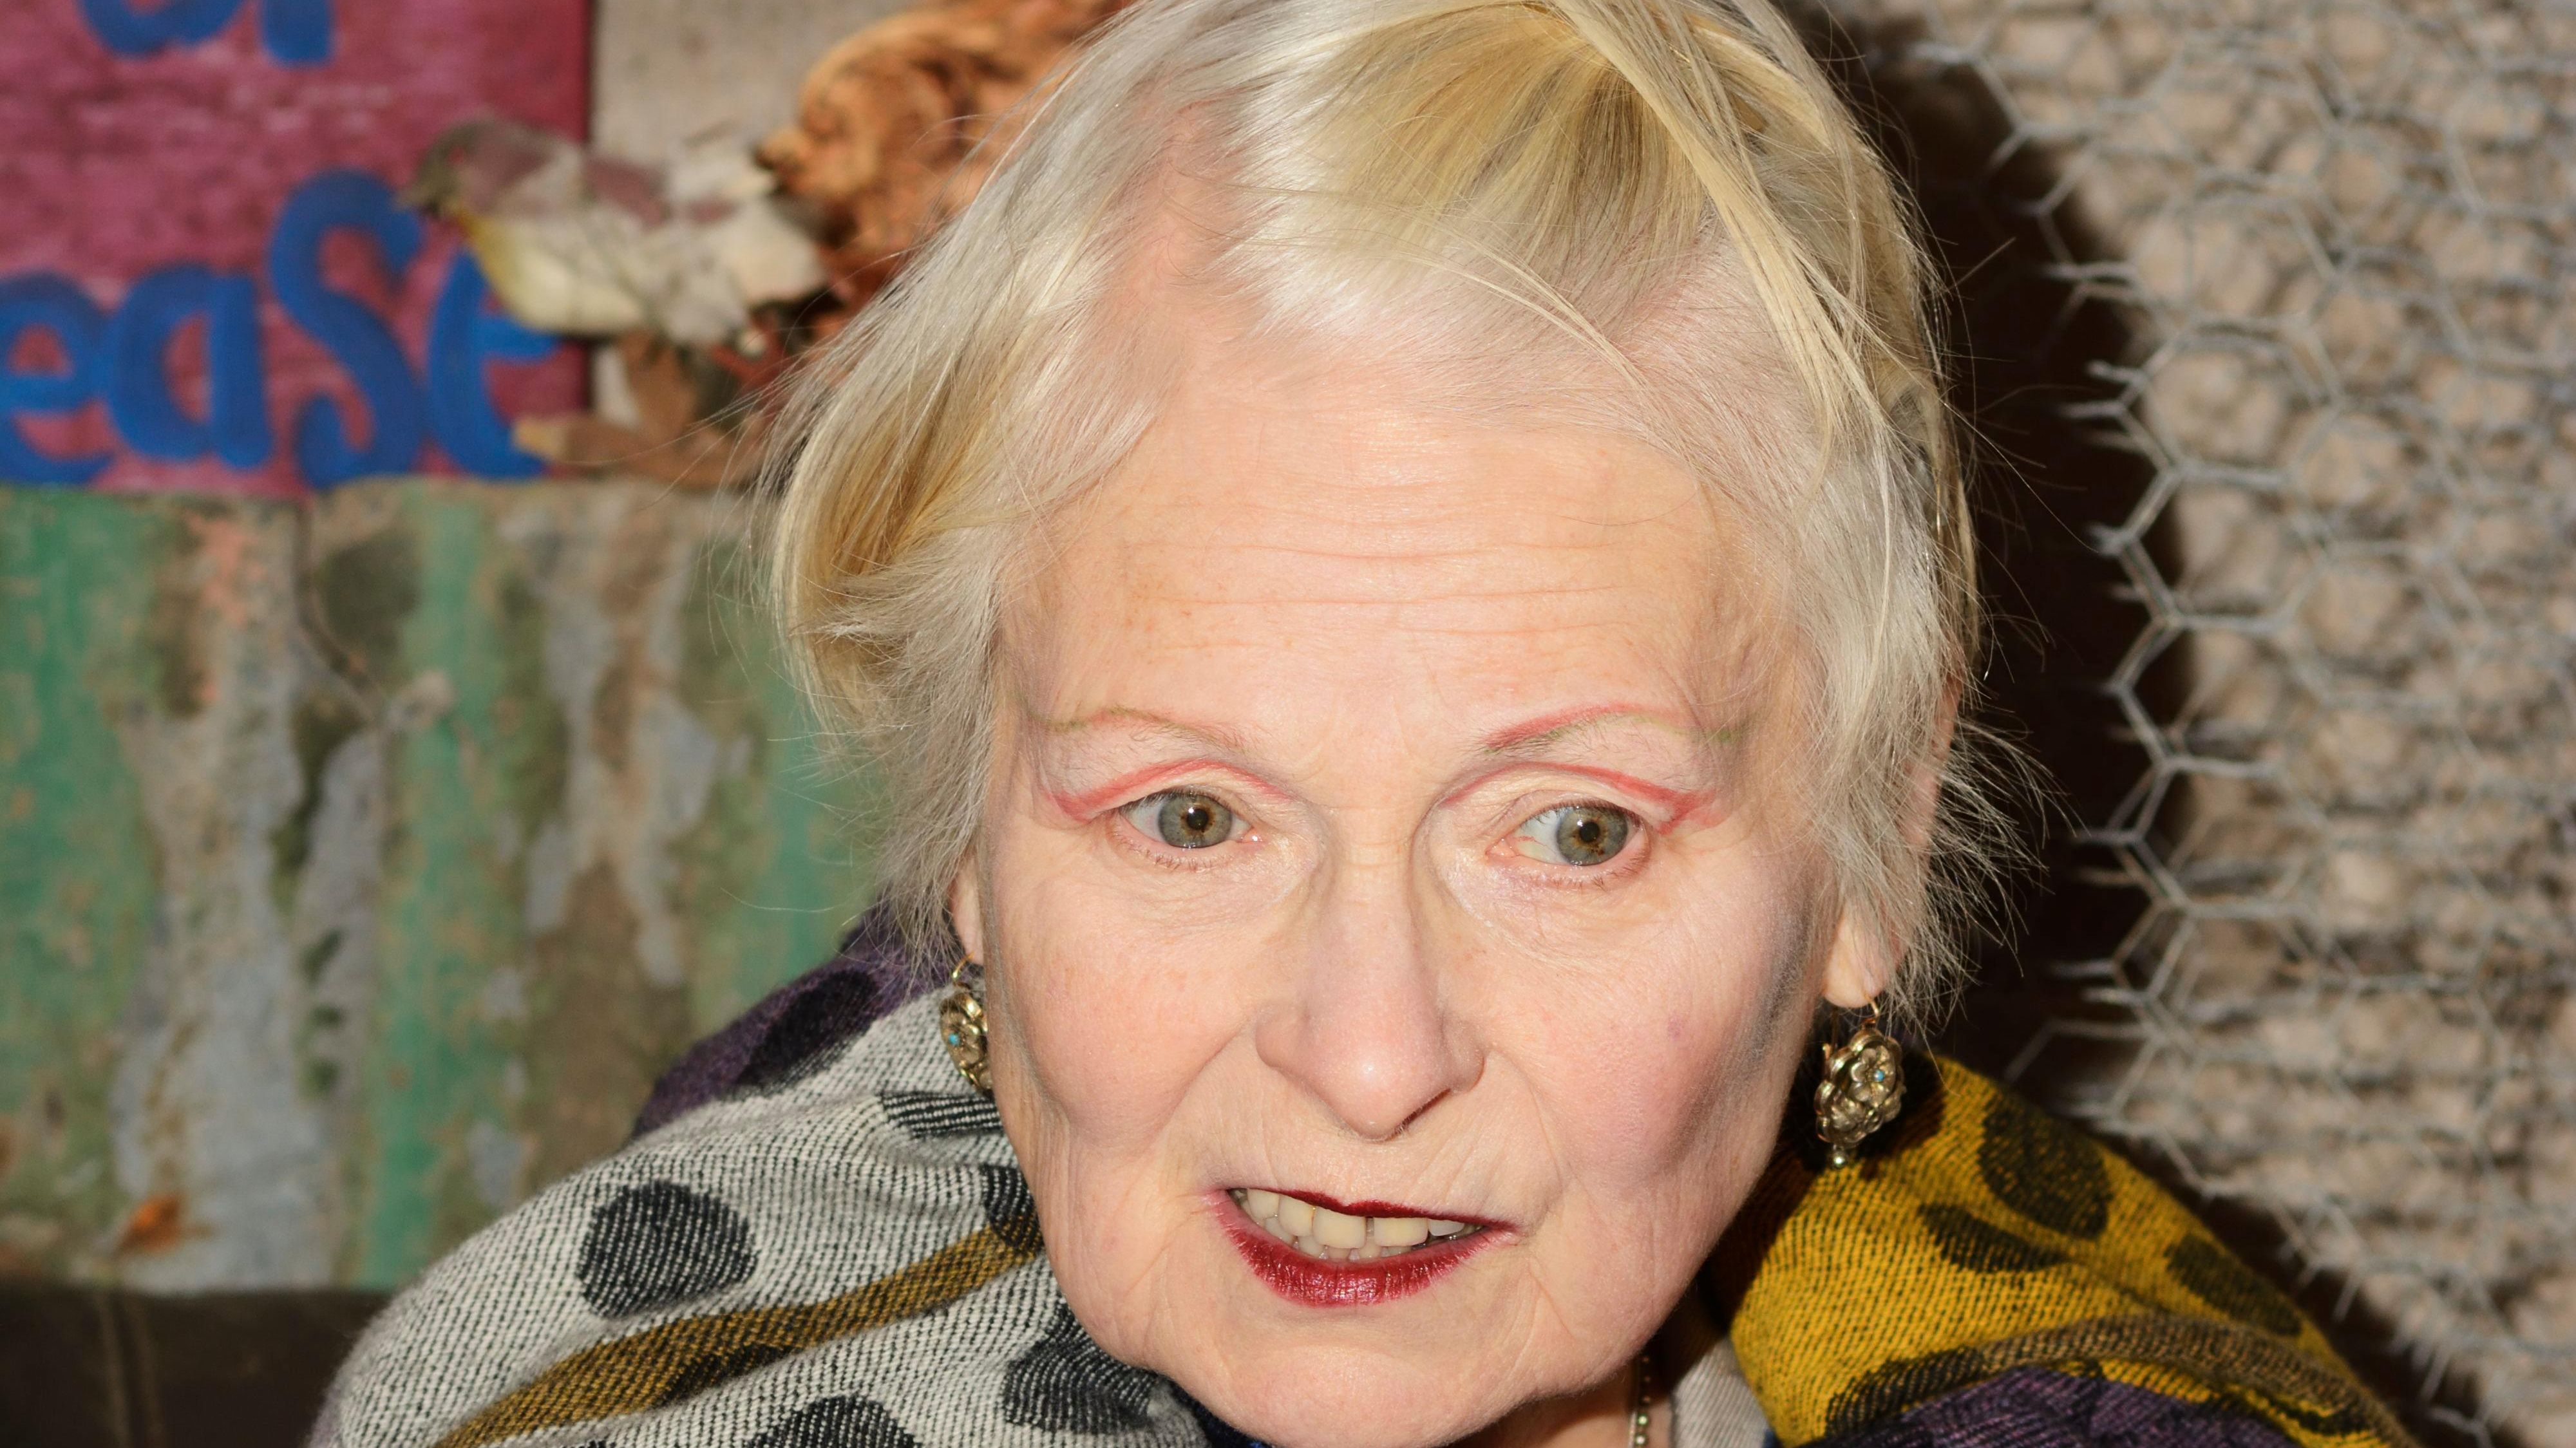 Flowers and urn taken from grave of Dame Vivian Westwood | News ...